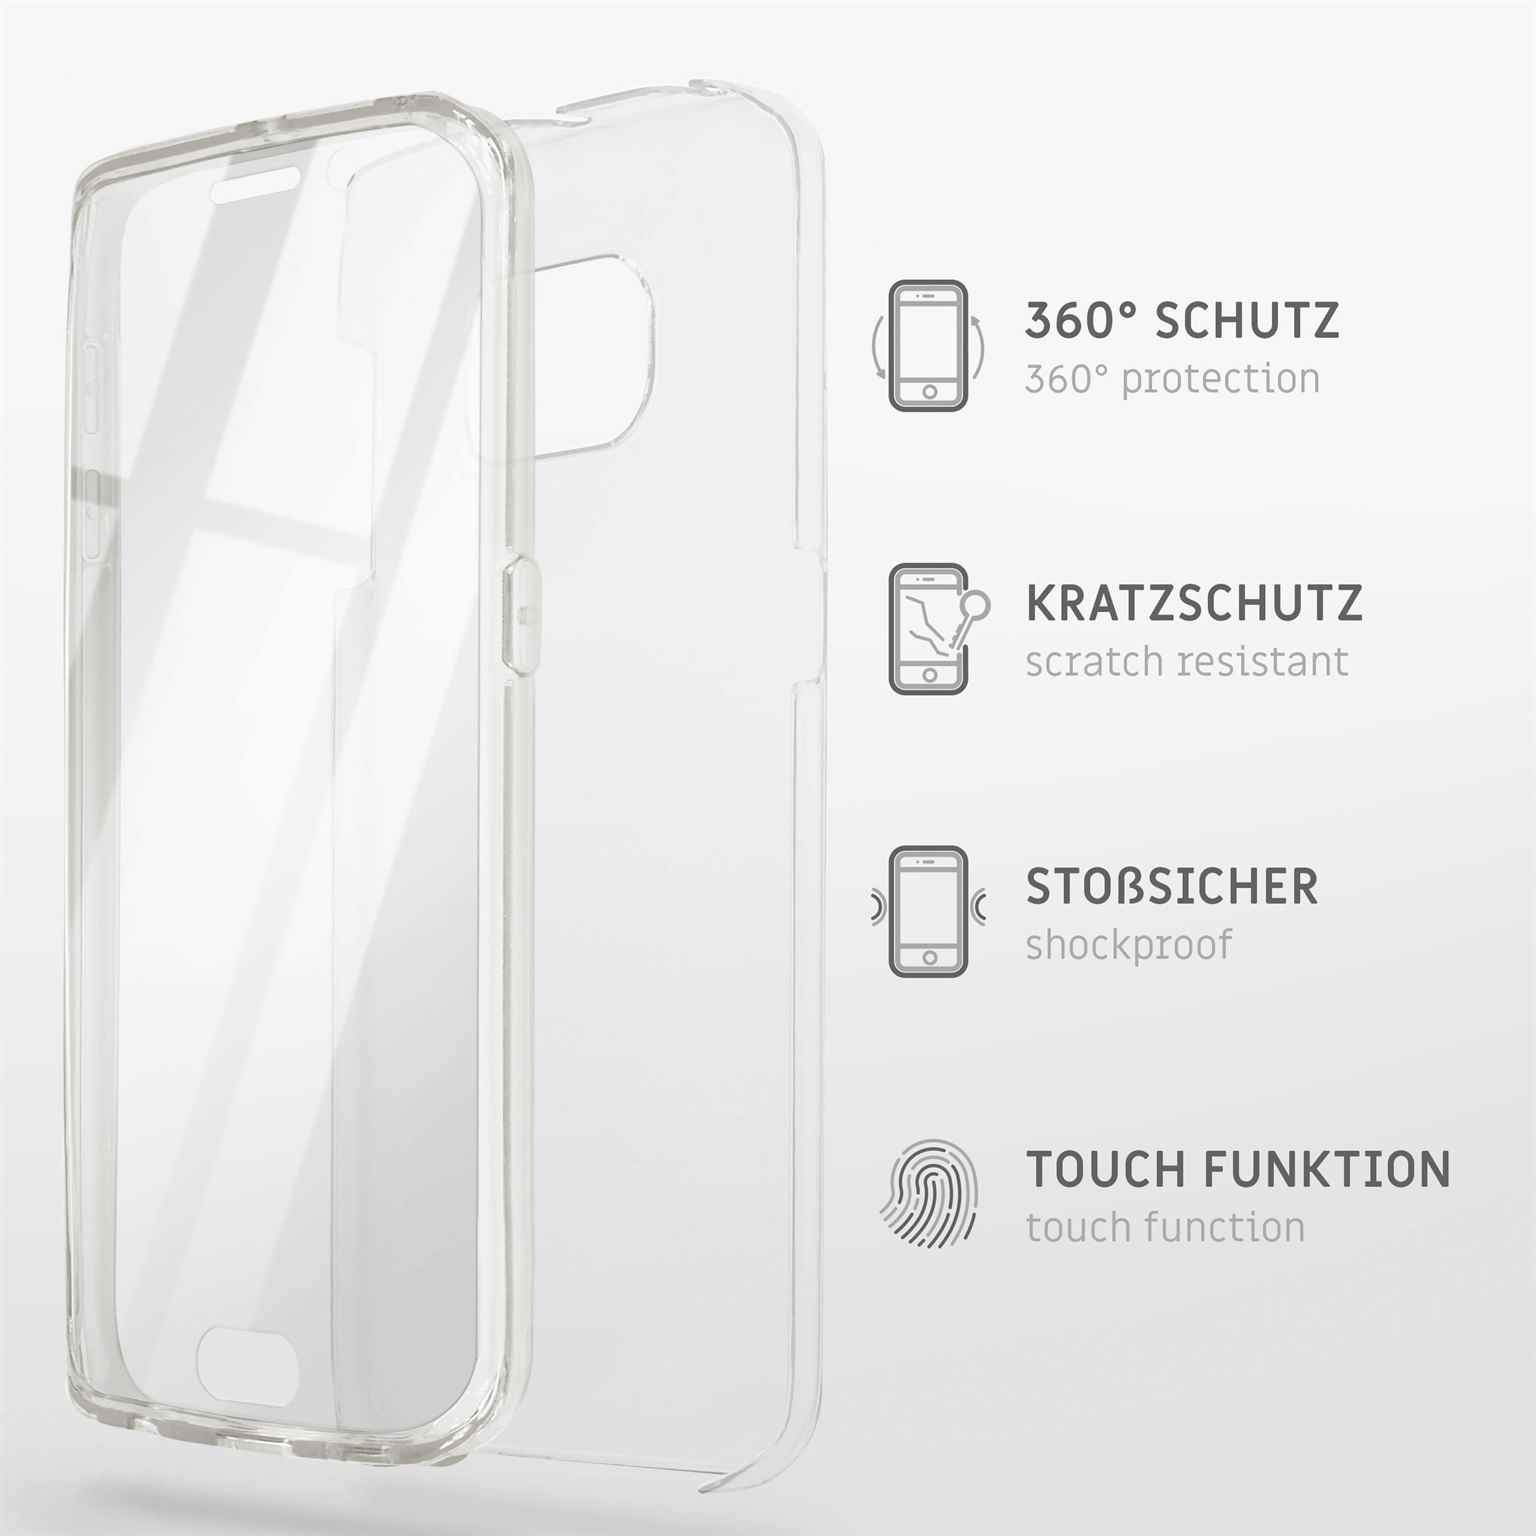 ONEFLOW Touch Case, Full Cover, Plus Ultra-Clear Samsung, Galaxy S20 / 5G